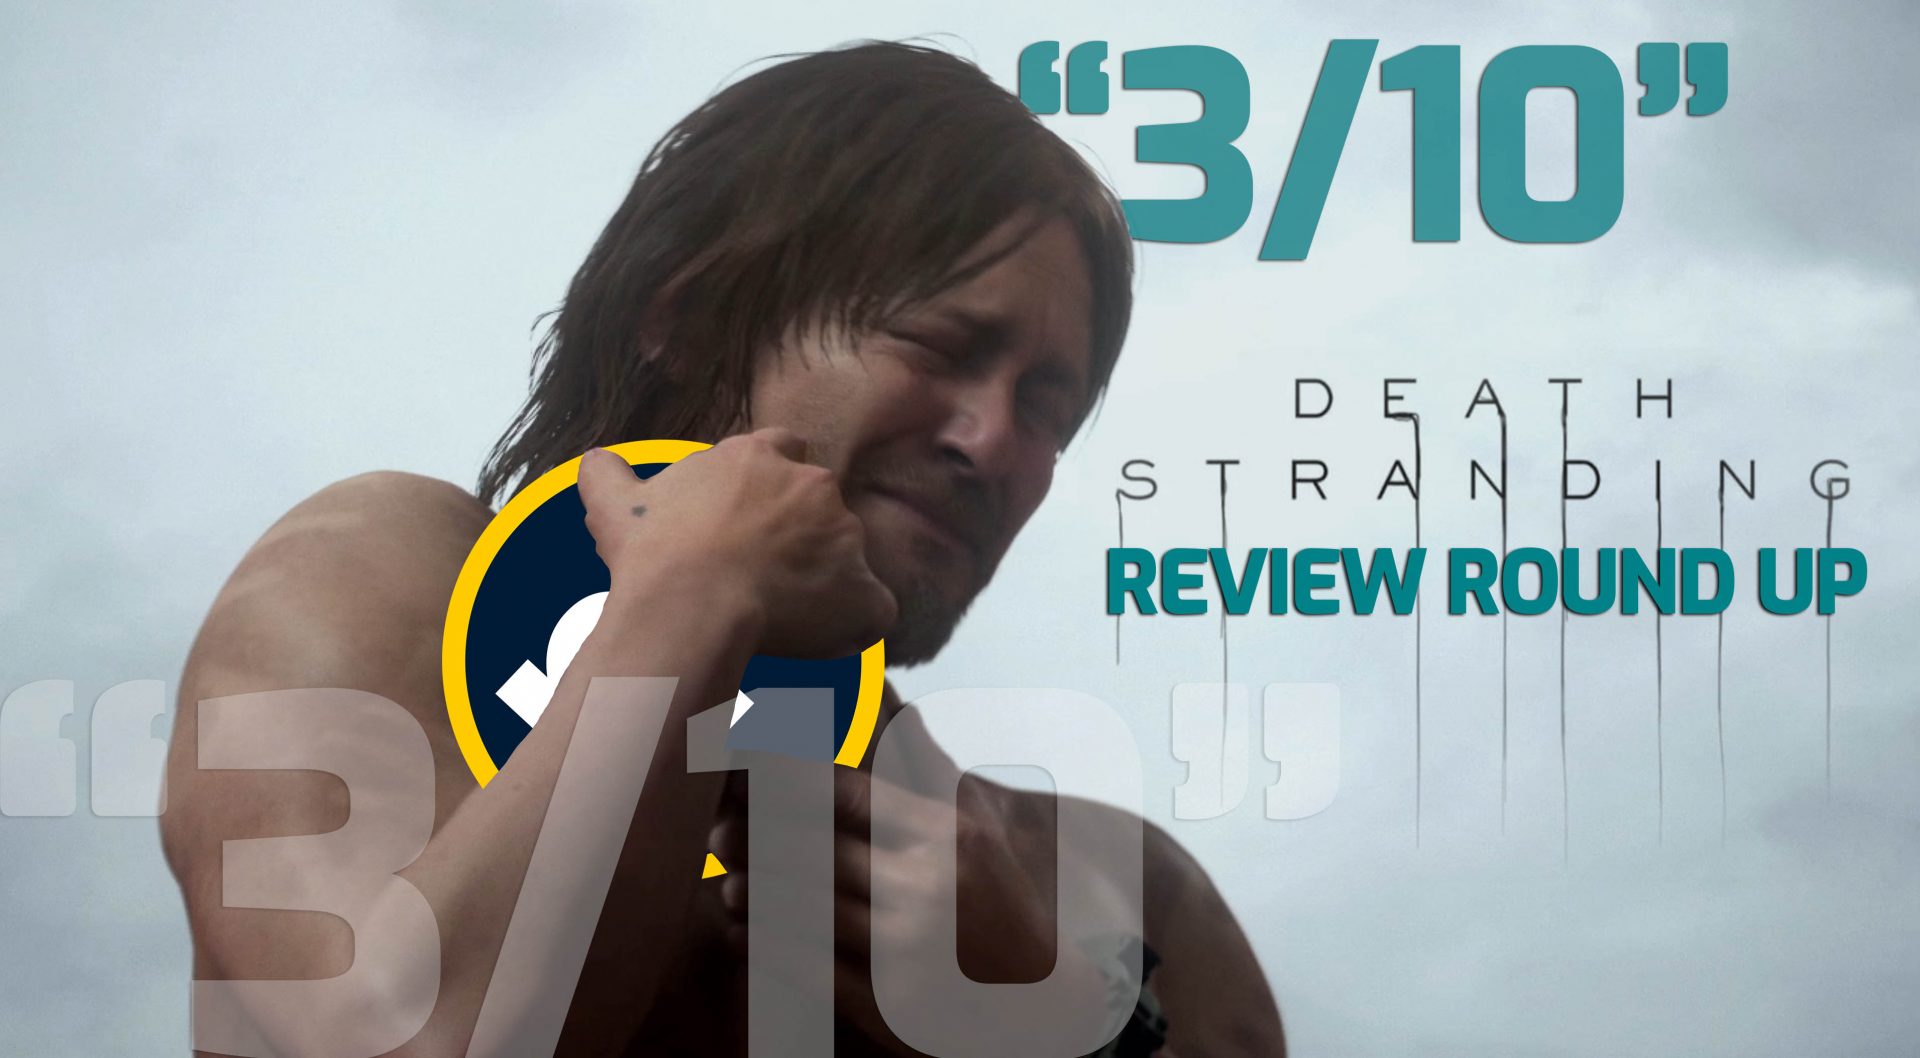 Metacritic - DEATH STRANDING (PS4) releases on Nov 8: Any